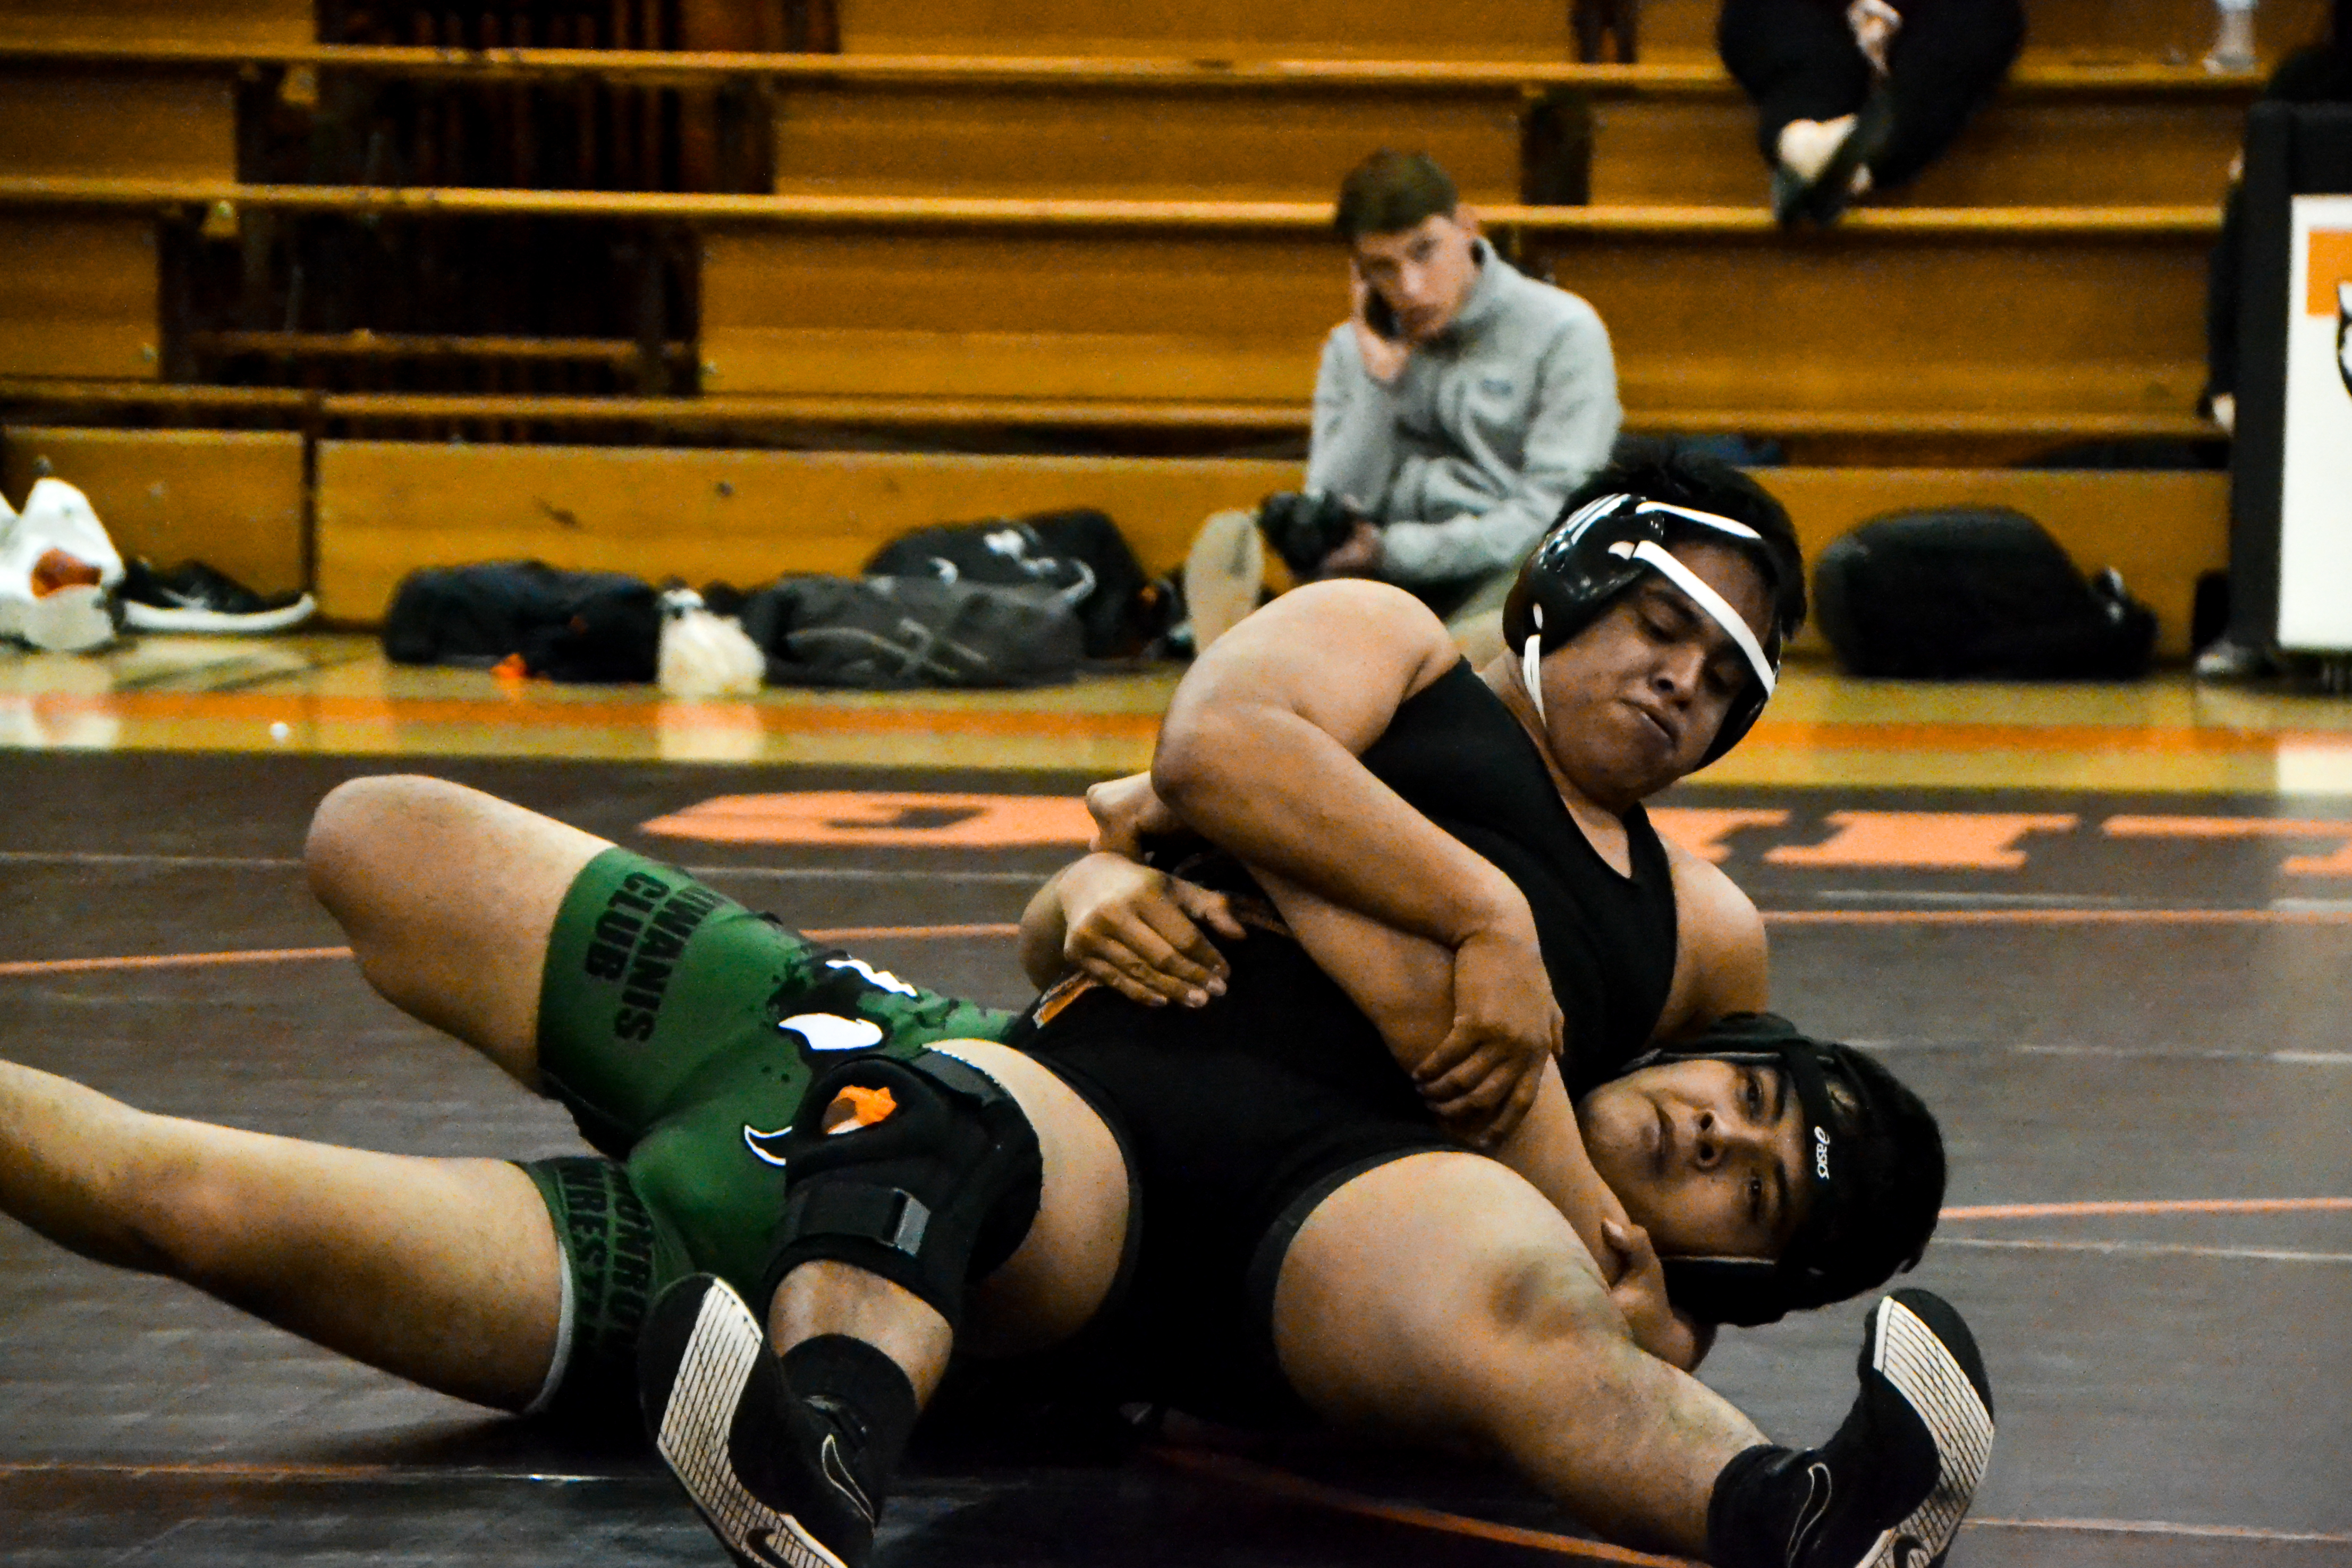 Wrestling team defeated in final match of season - Tiger Newspaper